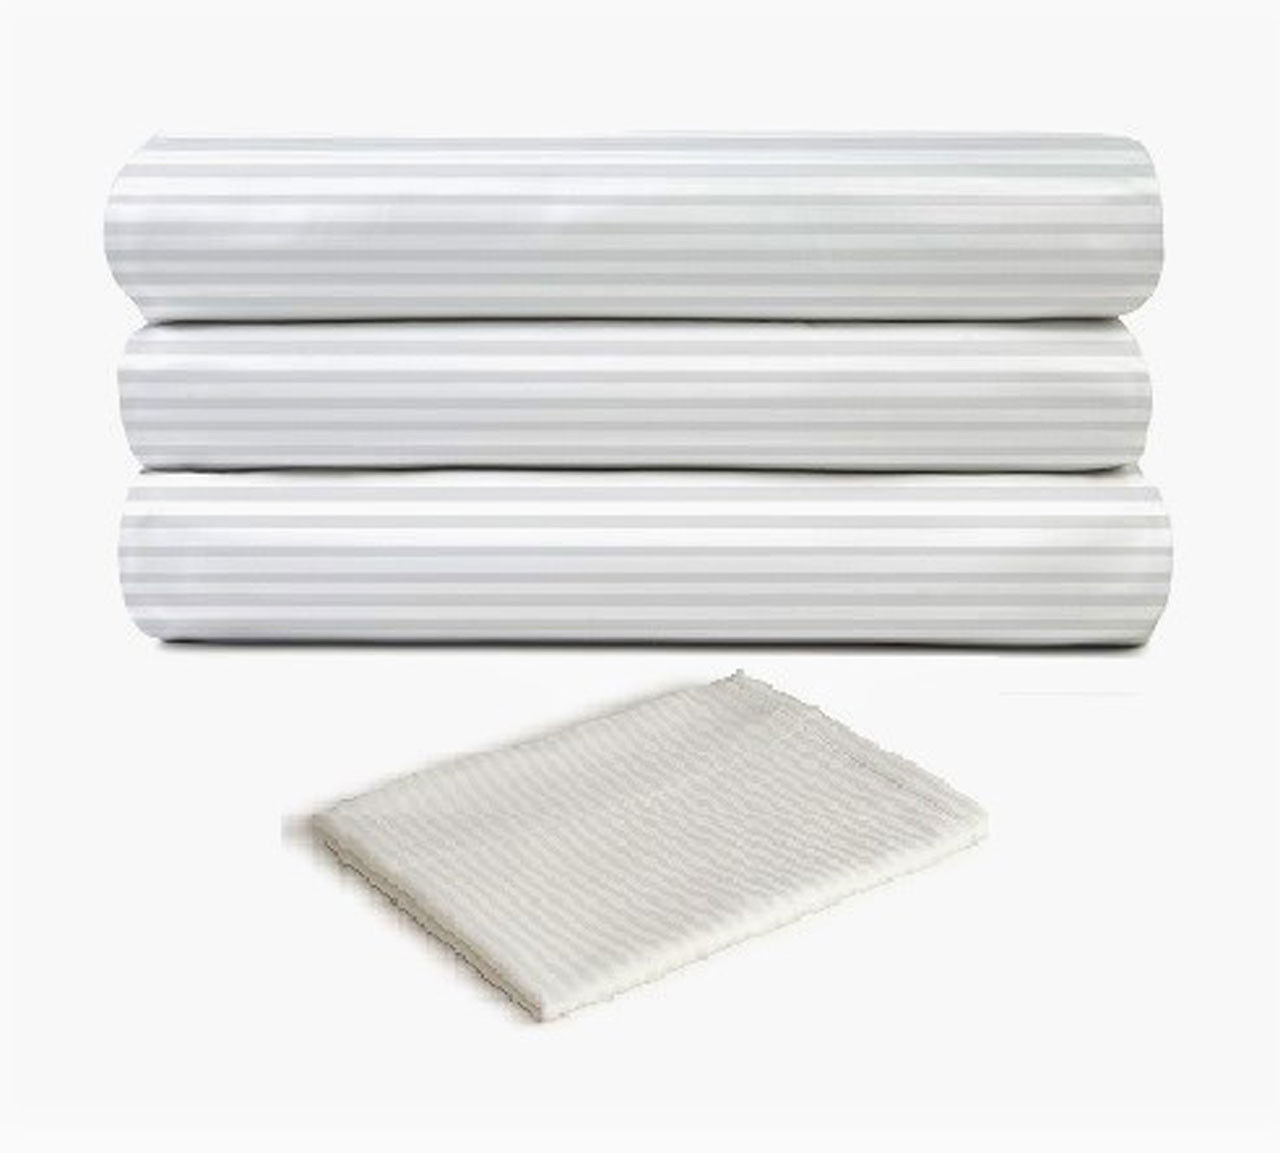 What's the material of hotel pillowcases wholesale by Golden Mills?